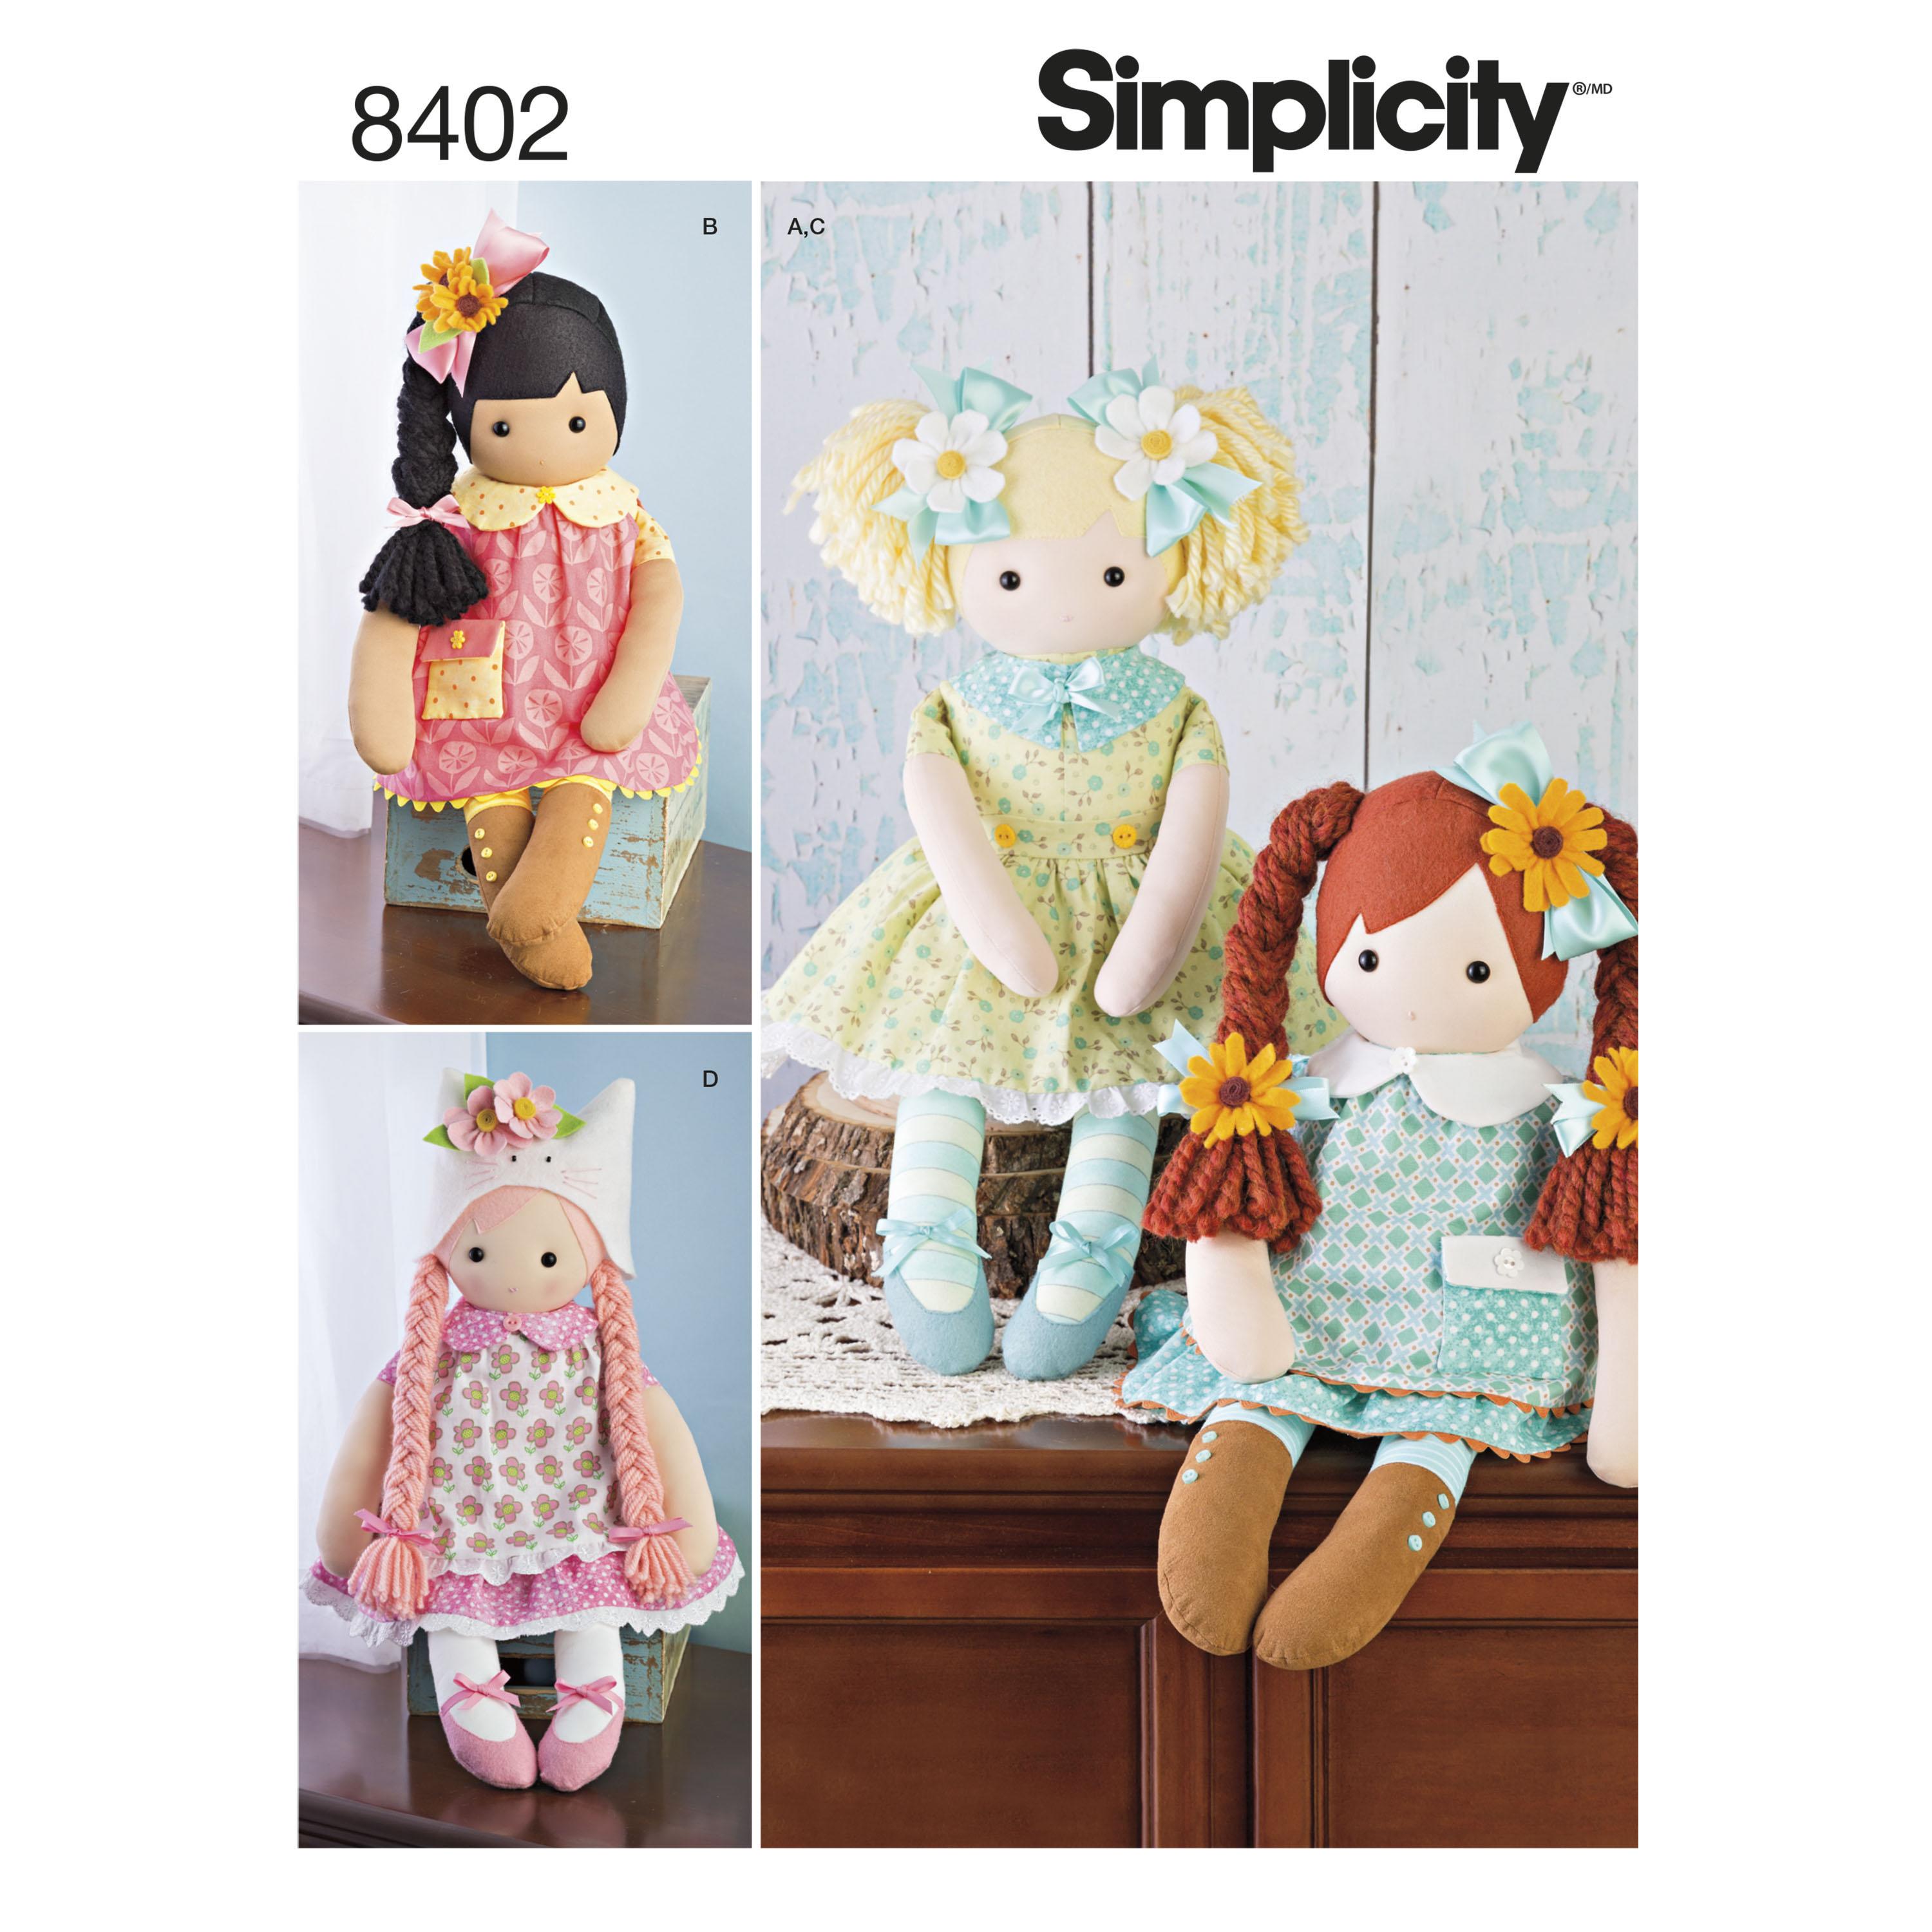 Simplicity S8402 23" Stuffed Dolls With Clothes